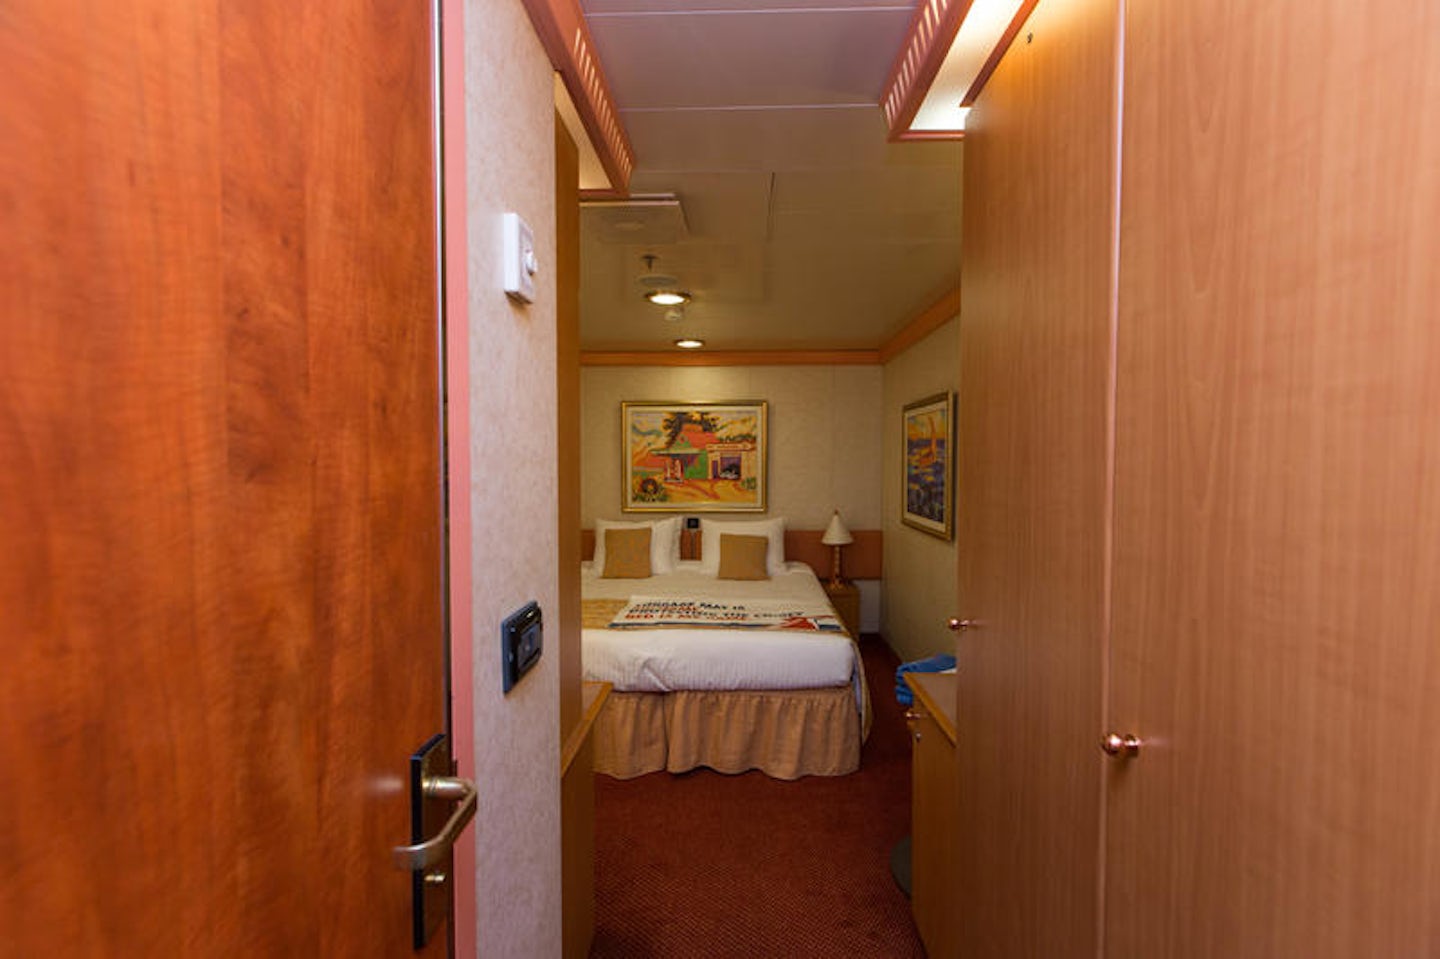 The Interior Cabin on Carnival Freedom